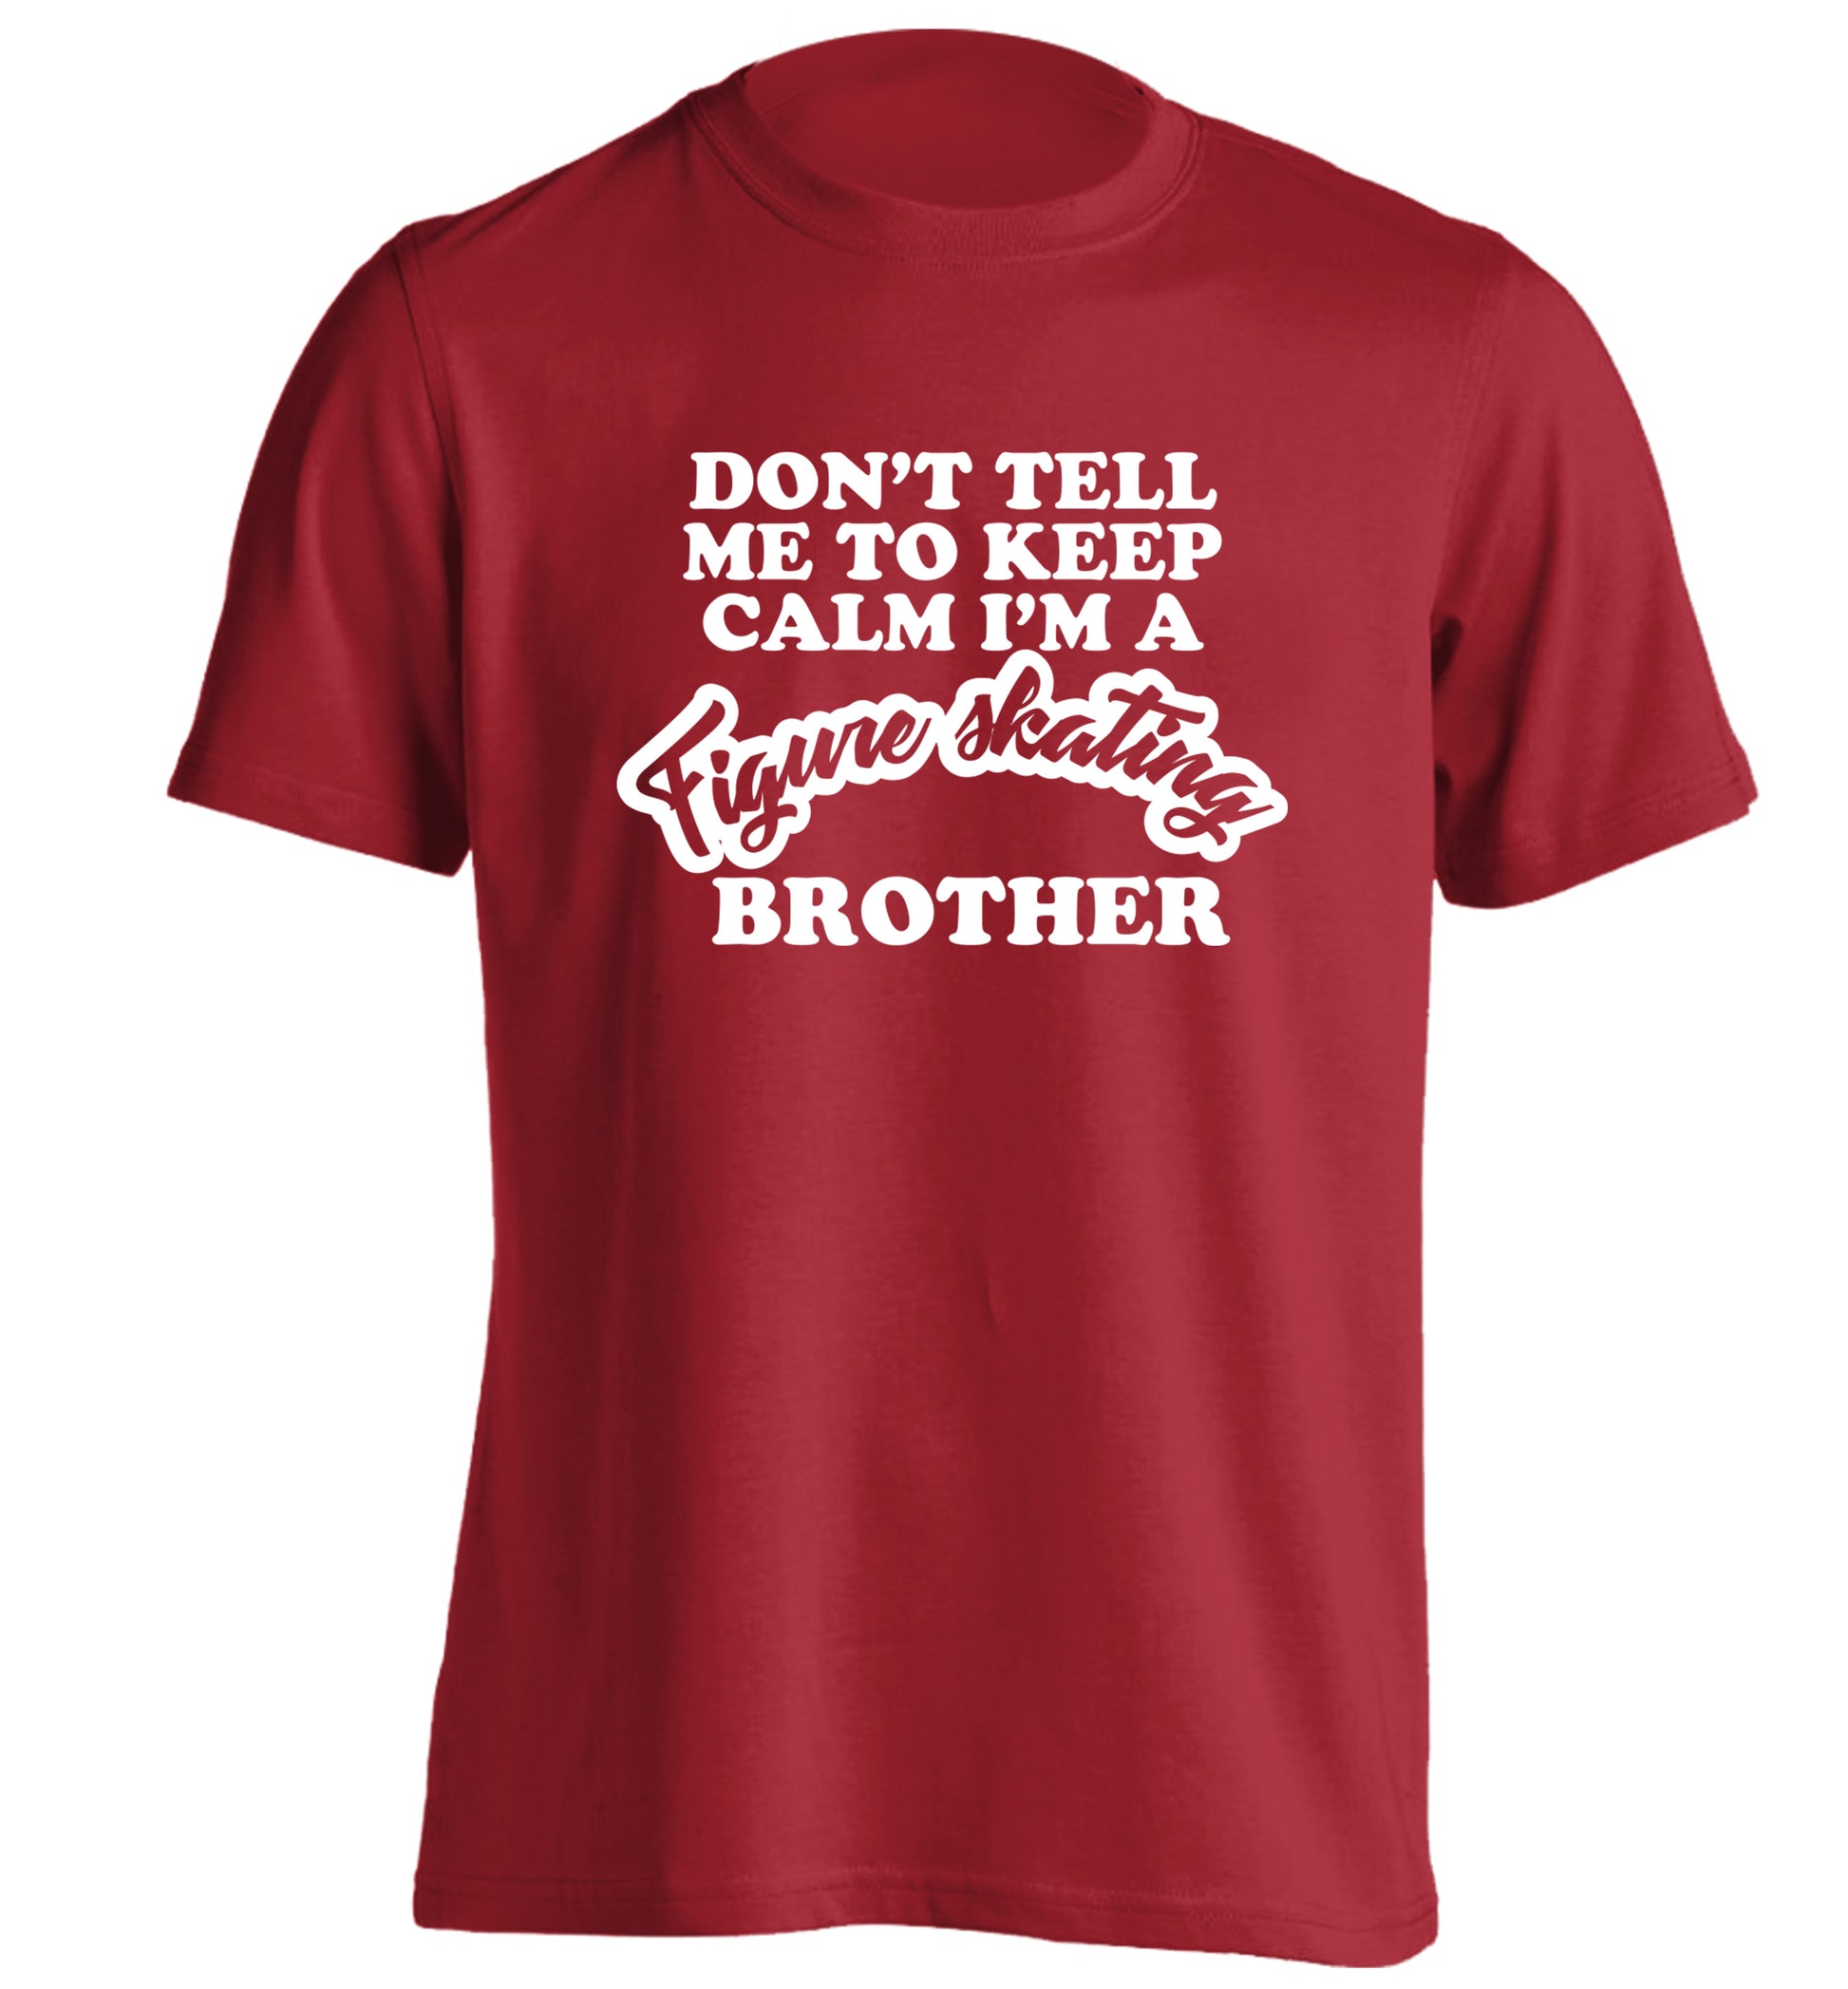 Don't tell me to keep calm I'm a figure skating brother adults unisexred Tshirt 2XL